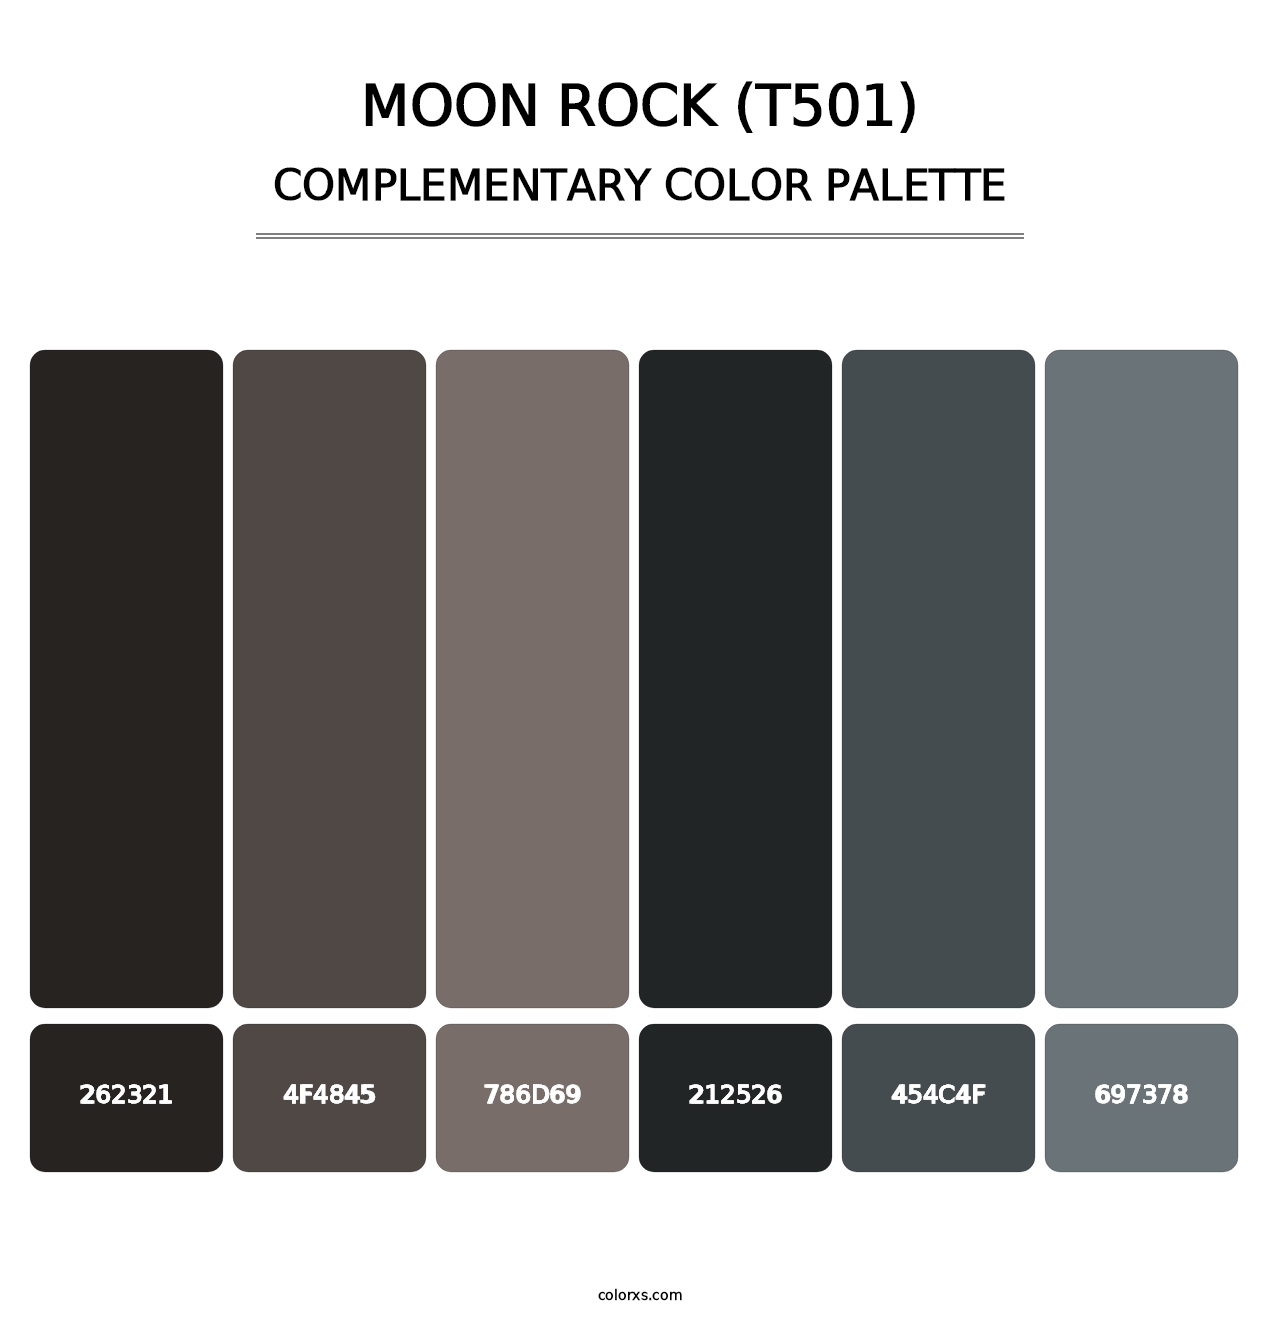 Moon Rock (T501) - Complementary Color Palette